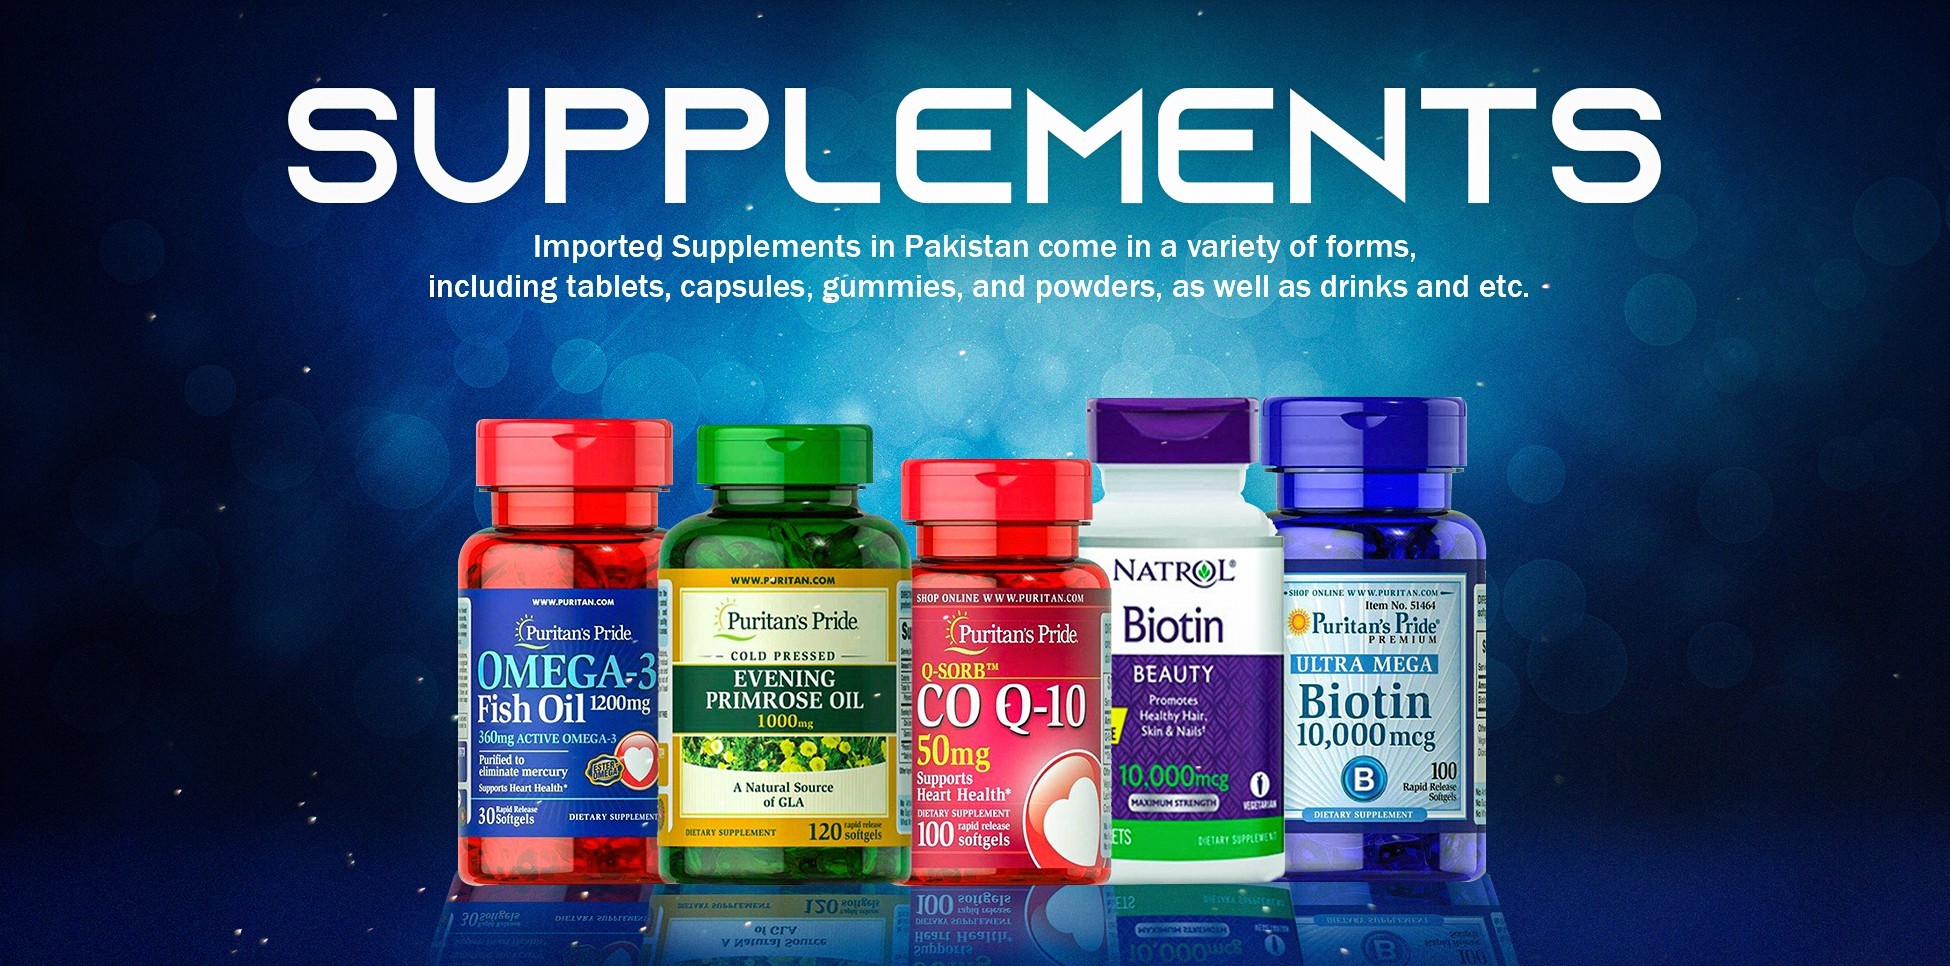 SUPPLEMENTS AND MULTIVITAMINS